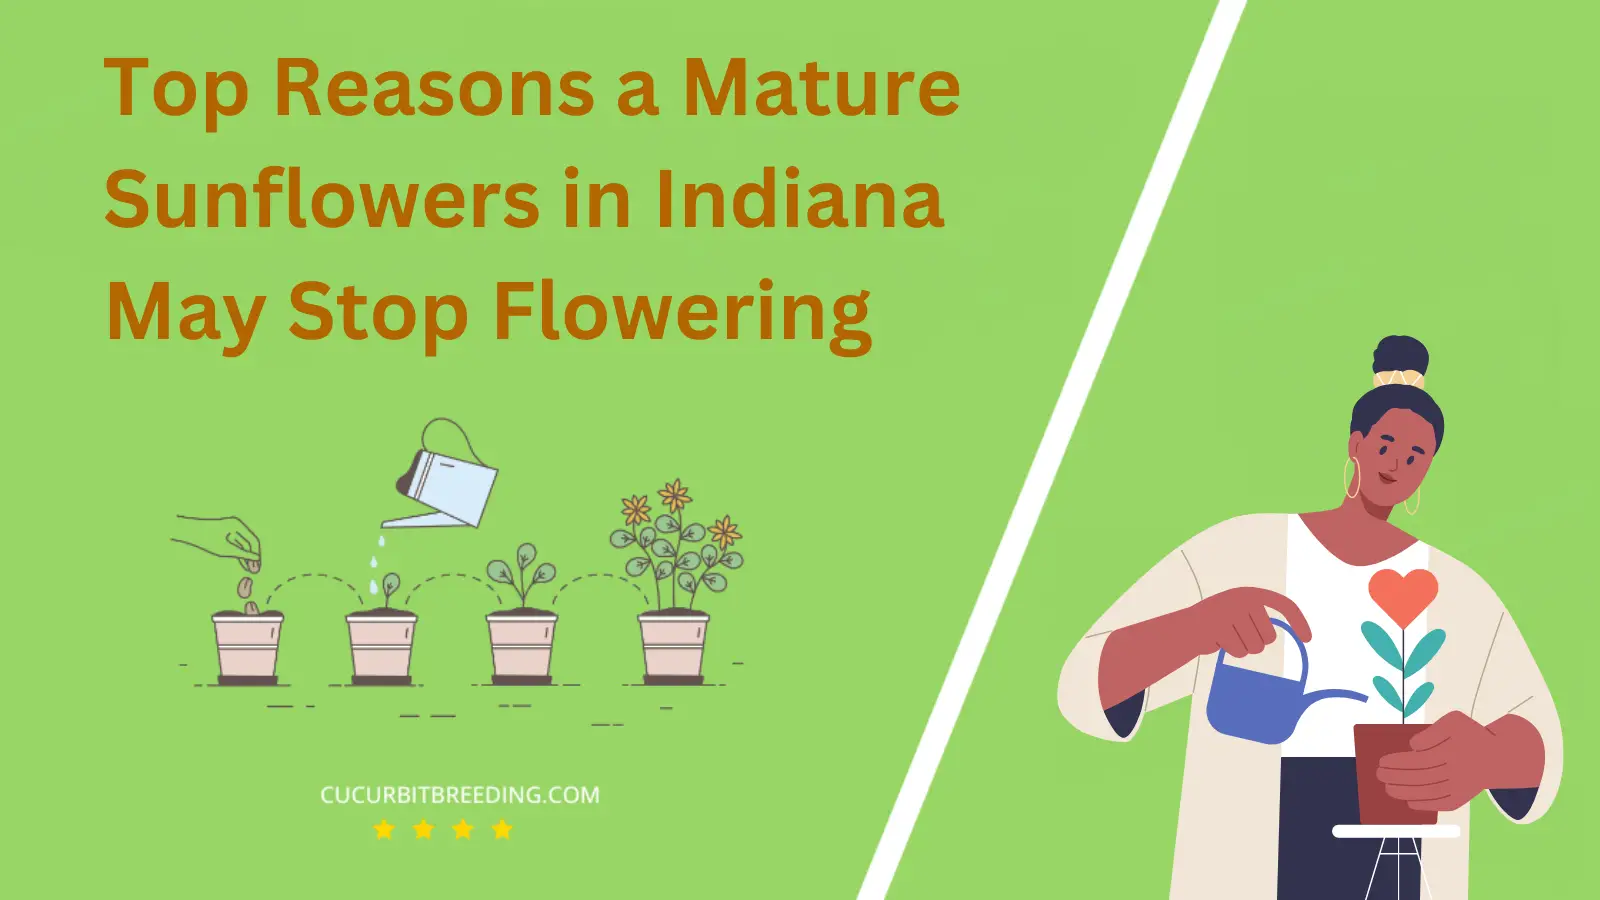 Top Reasons a Mature Sunflowers in Indiana May Stop Flowering